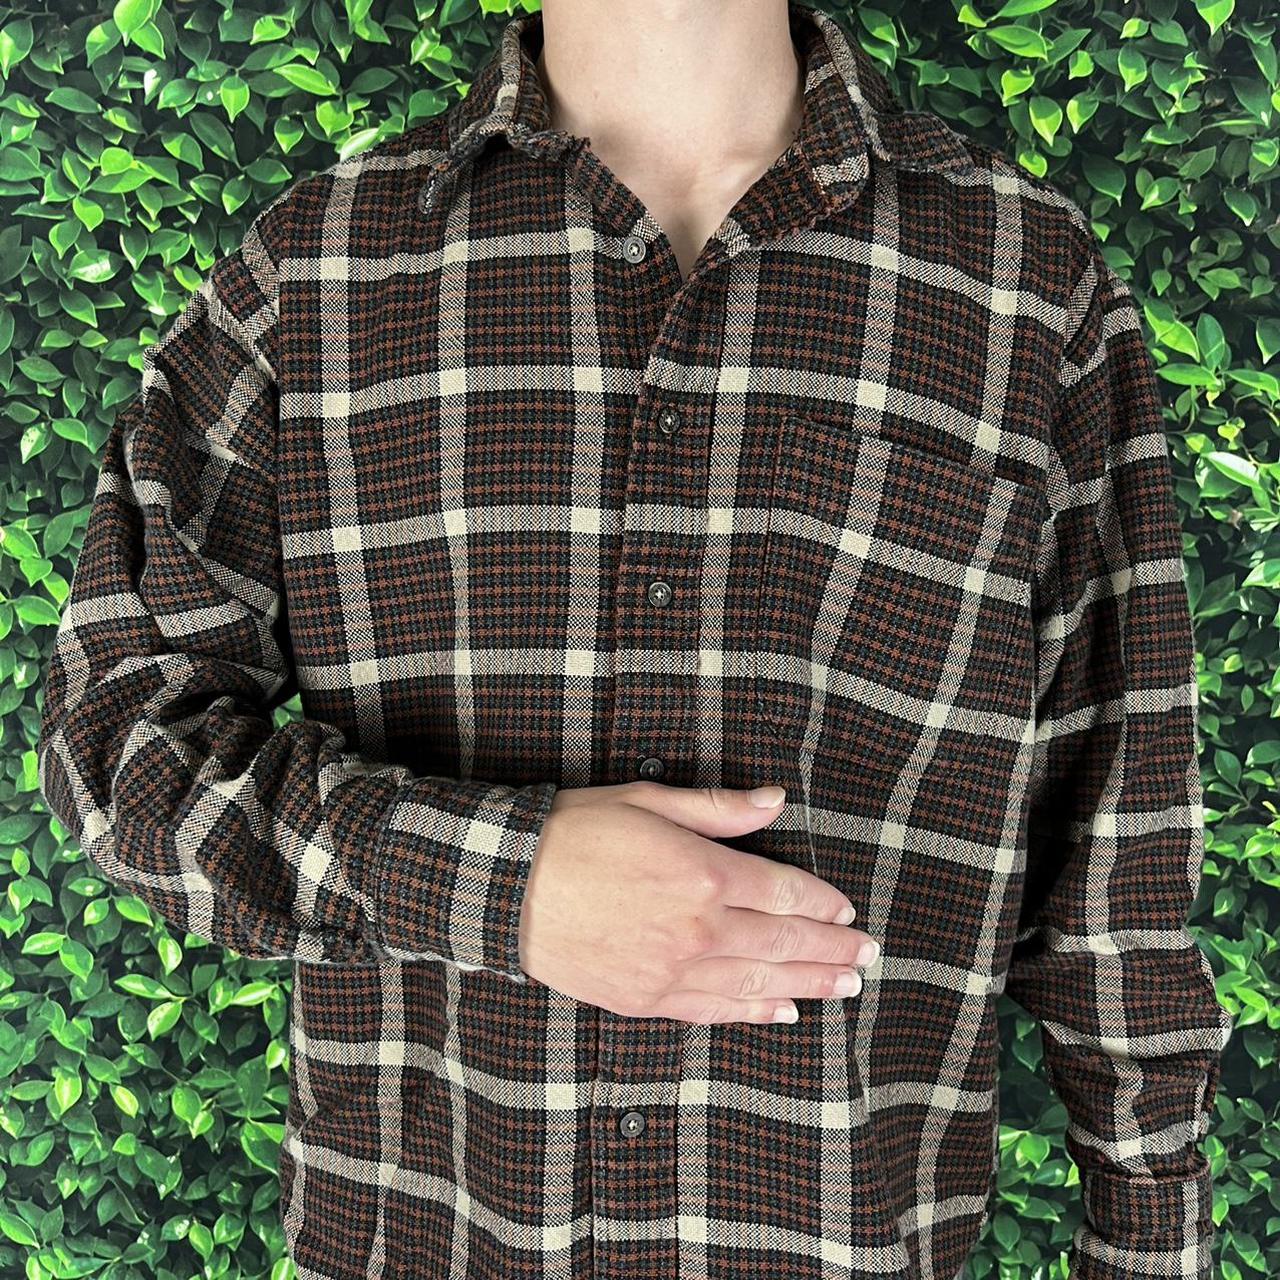 Product Image 1 - Earth tone skater dad flannel